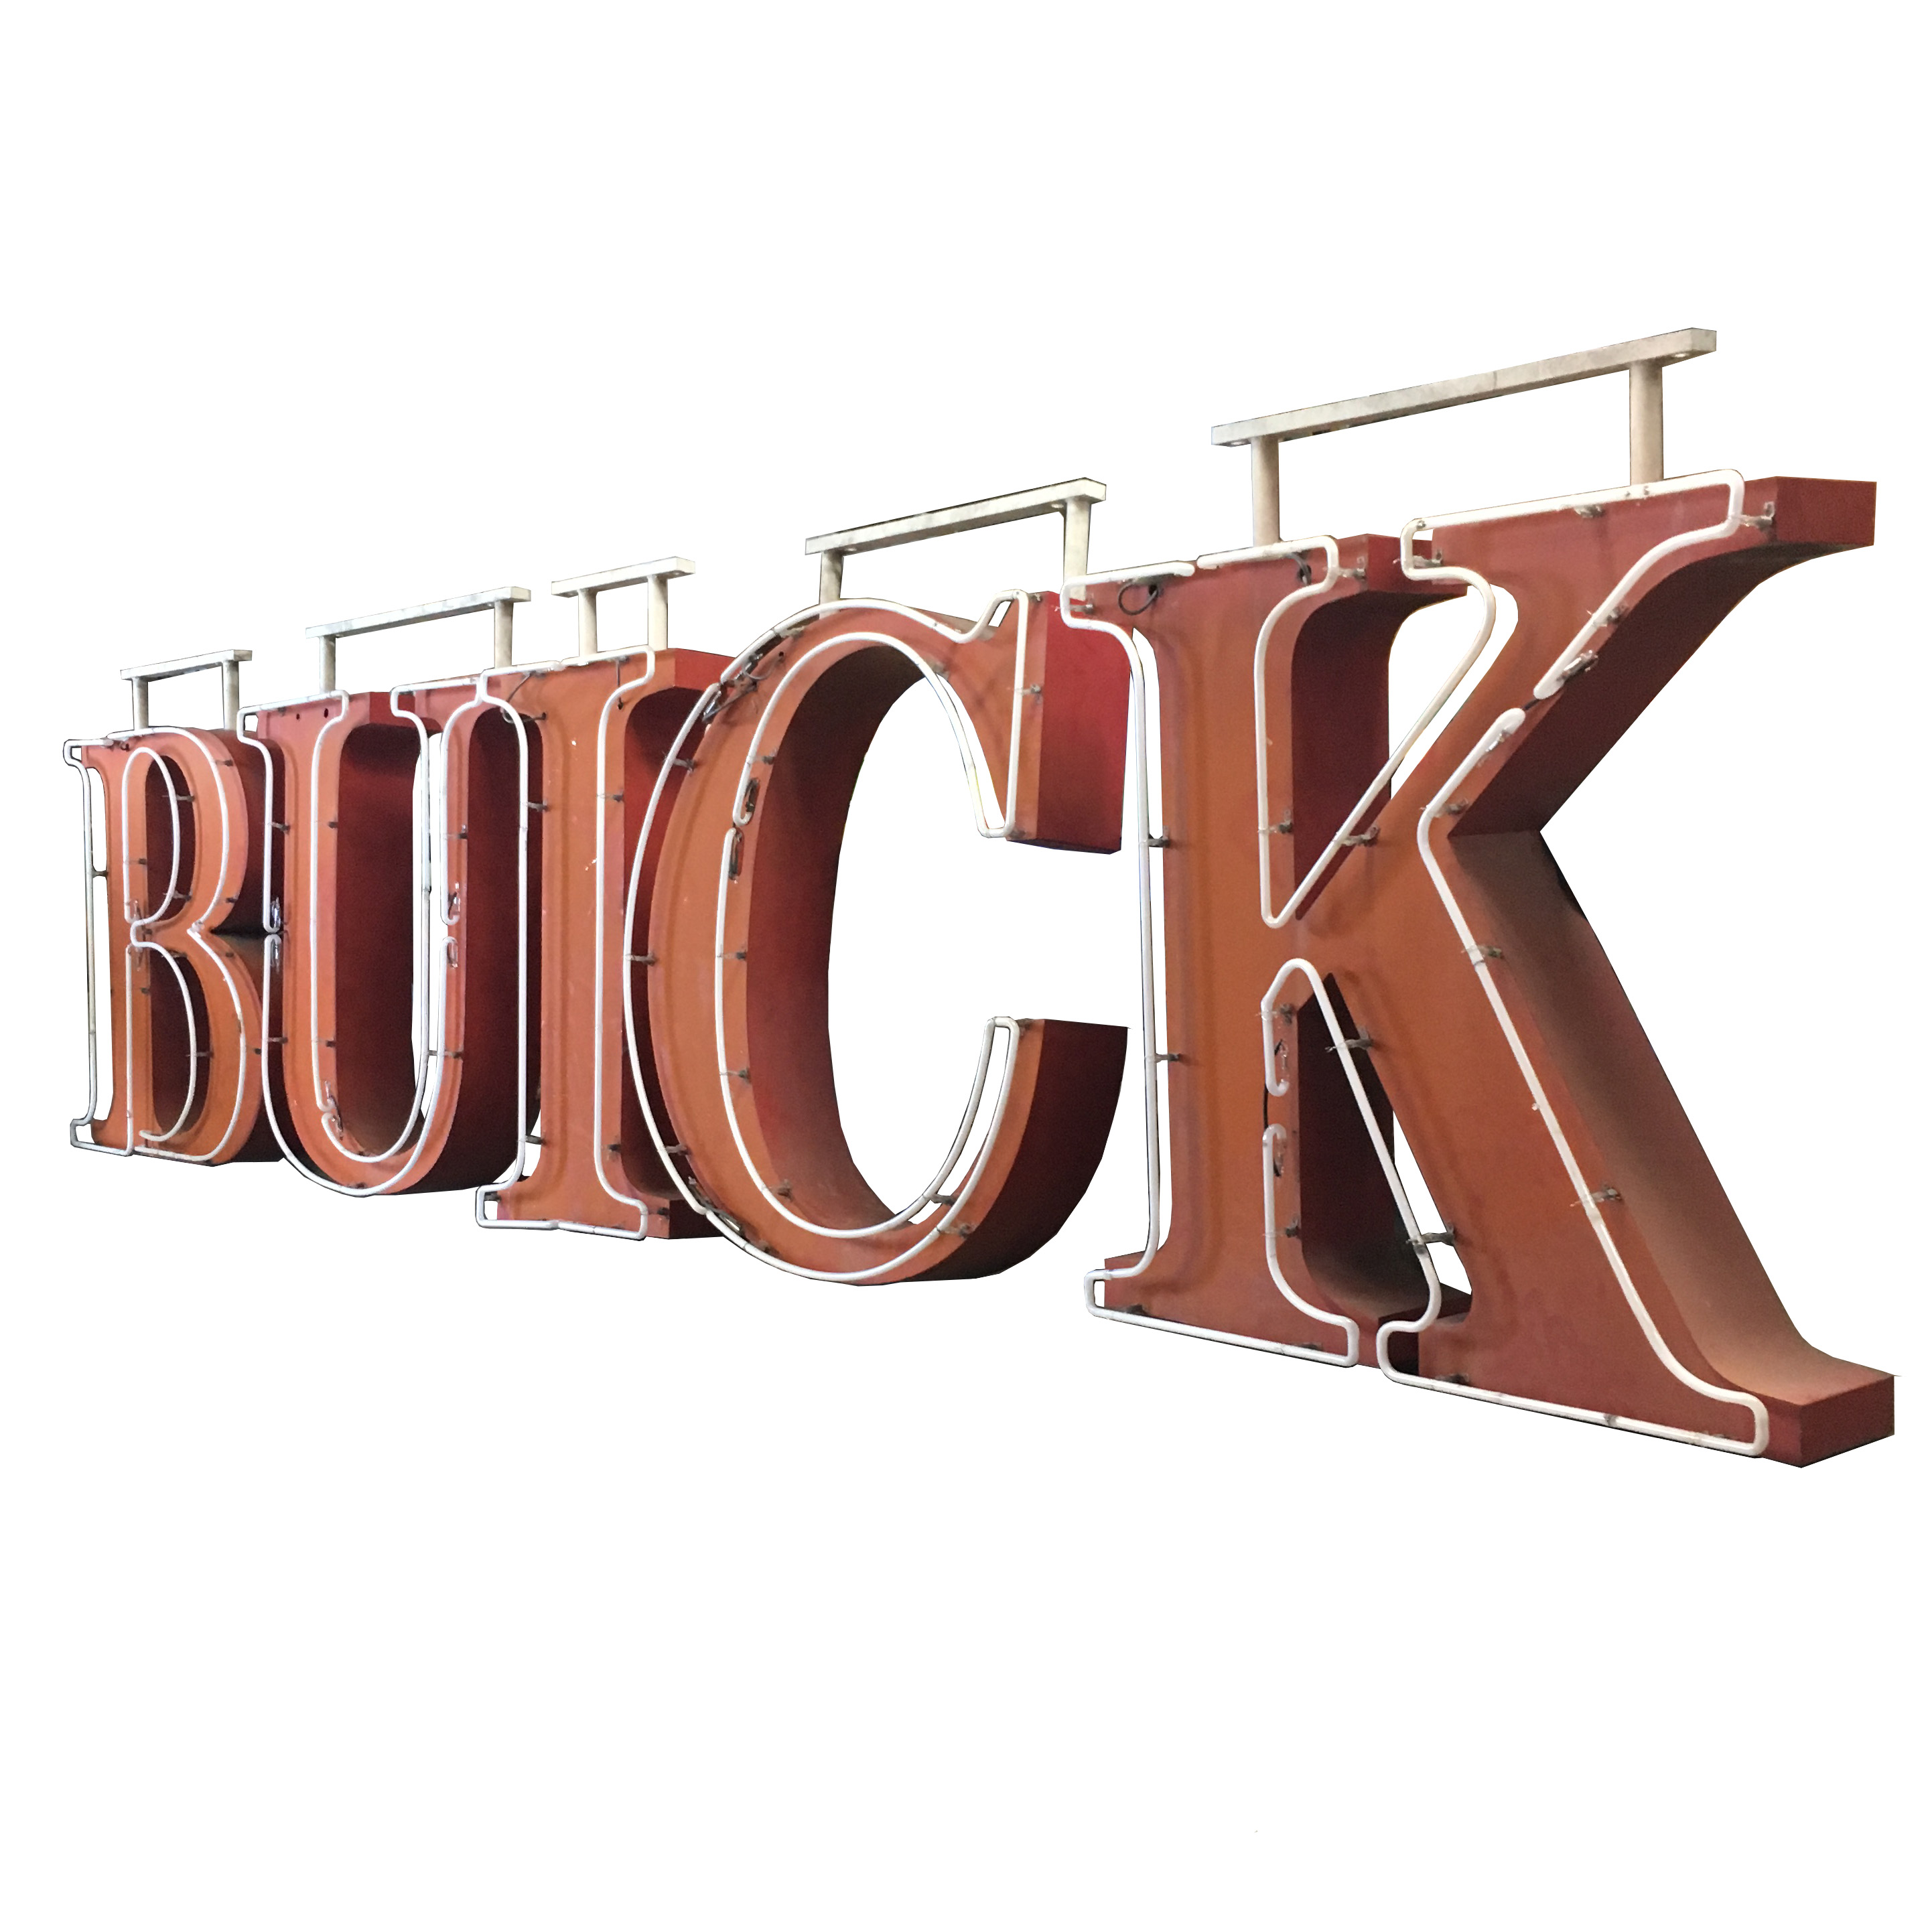 Buick Neon Sign